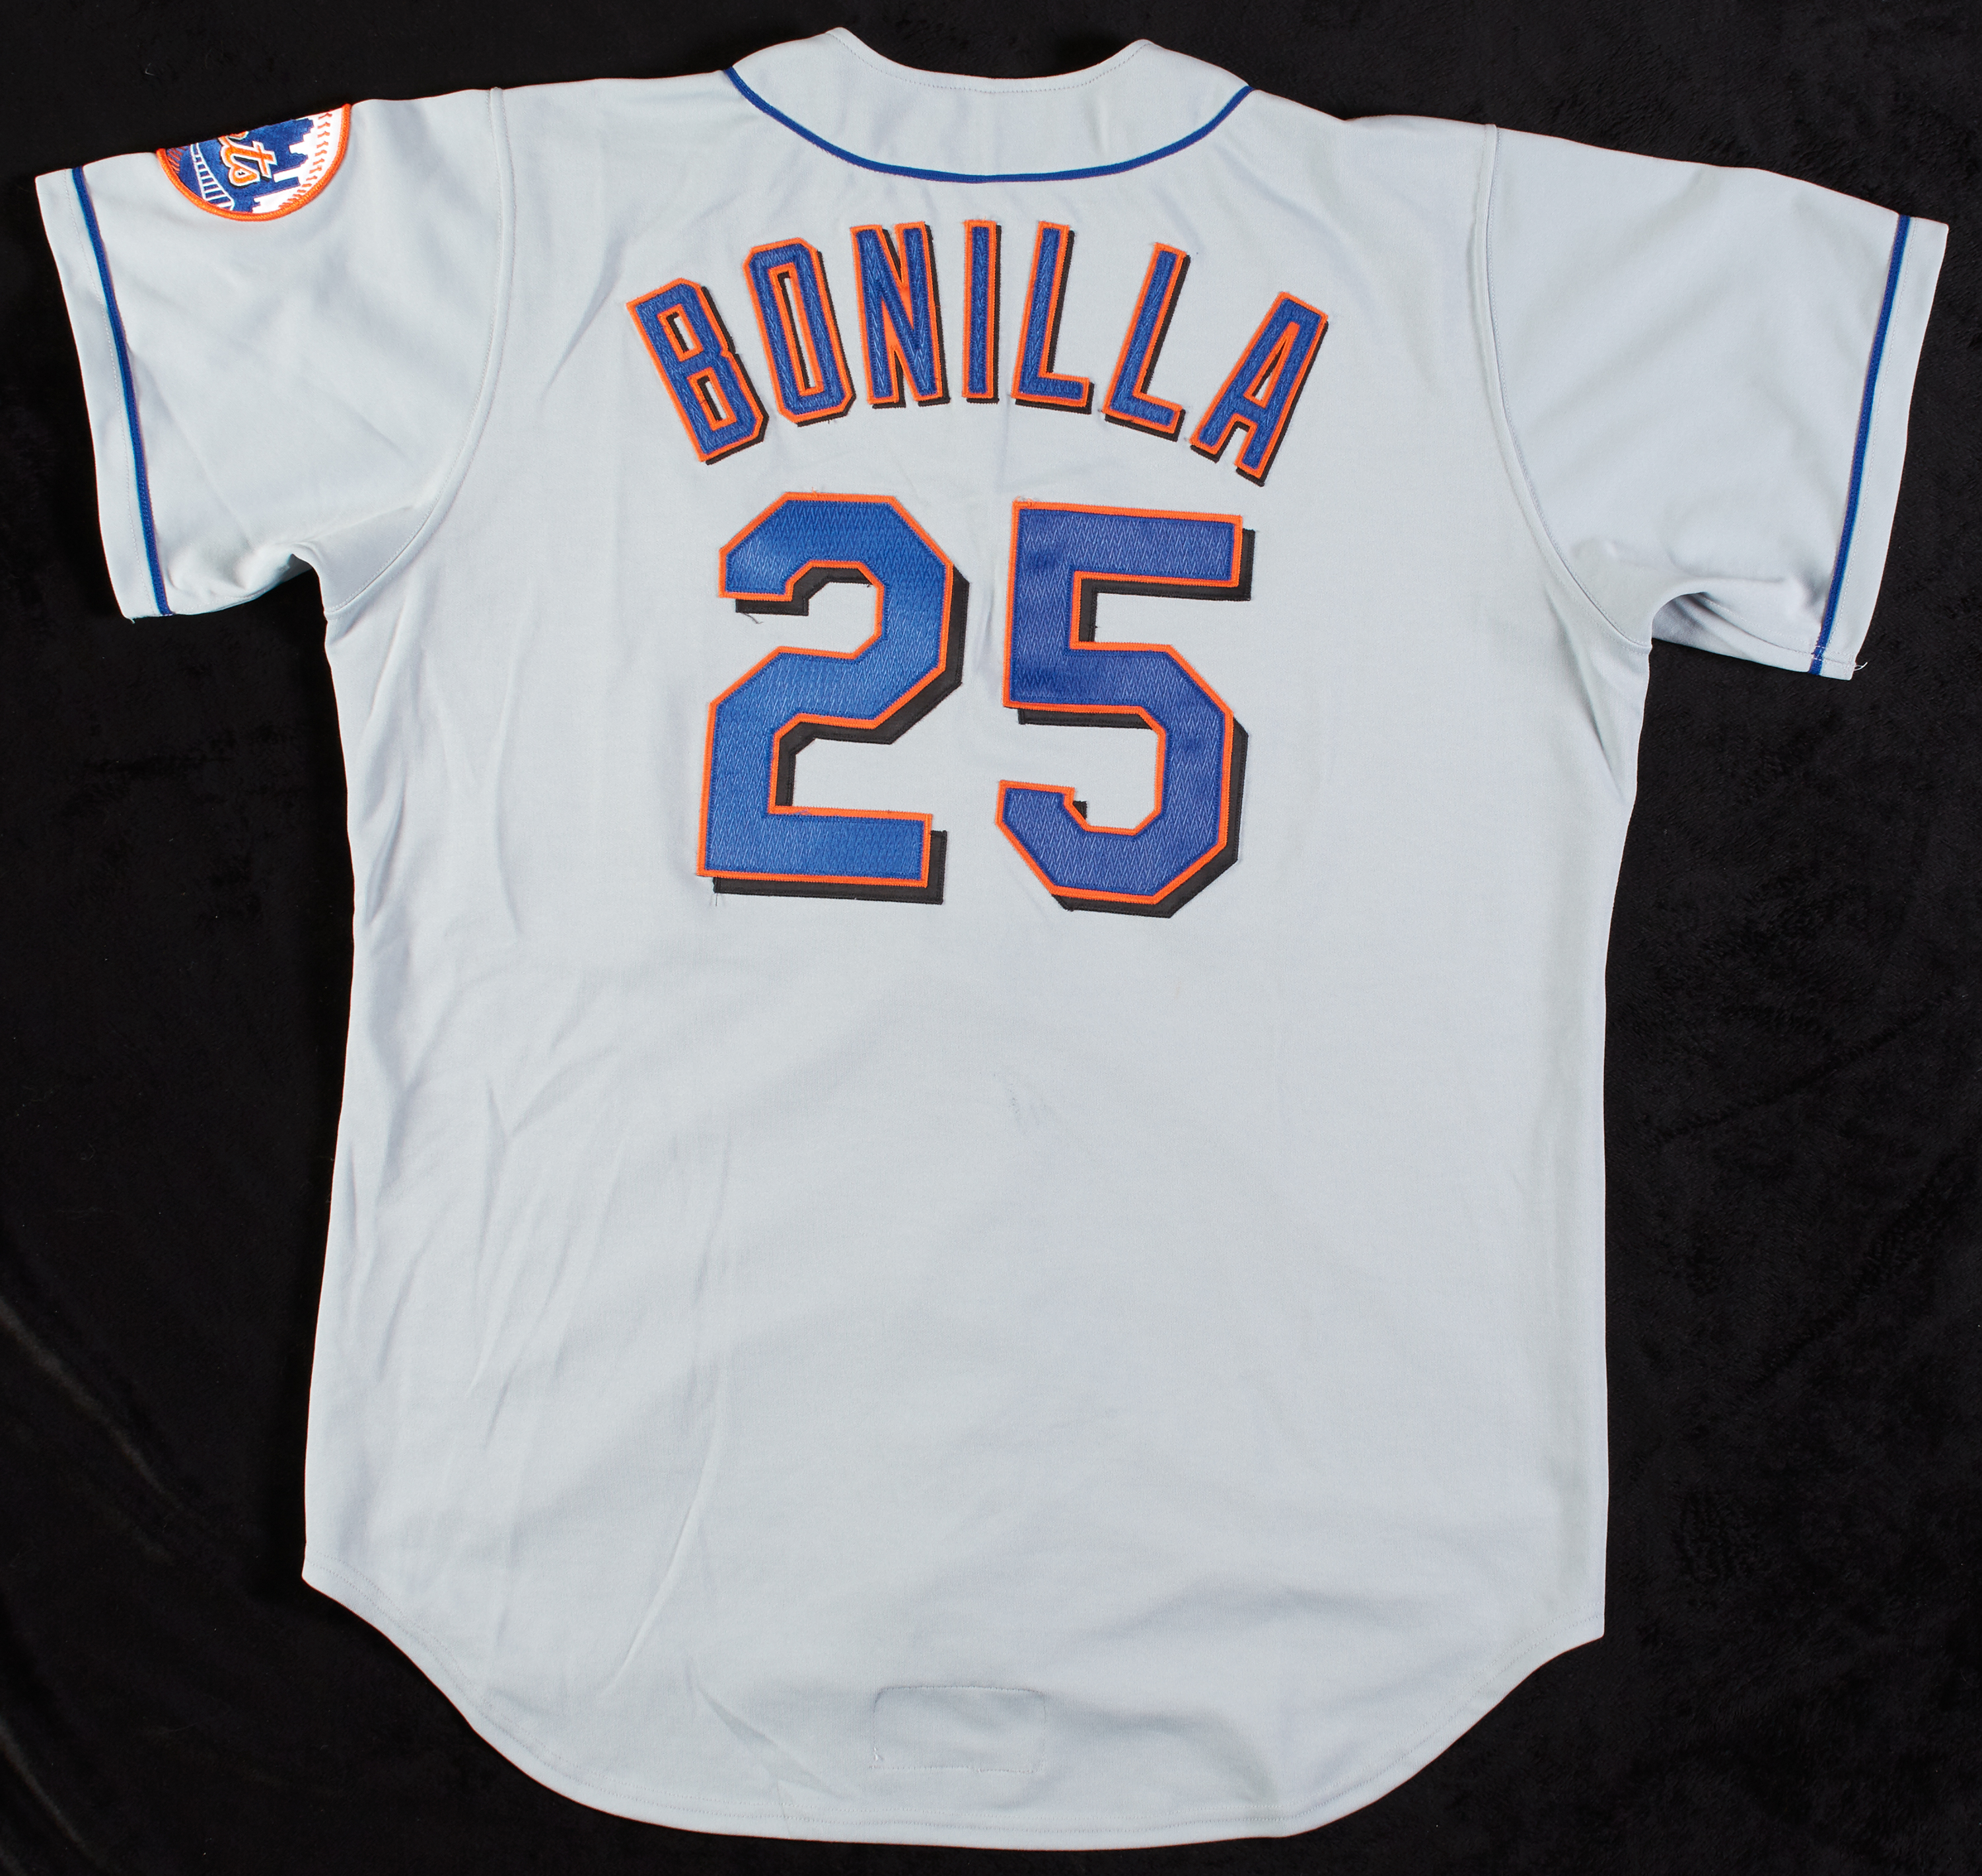 Bobby Bonilla Autographed Mets Jersey for Sale in Pontotoc, MS